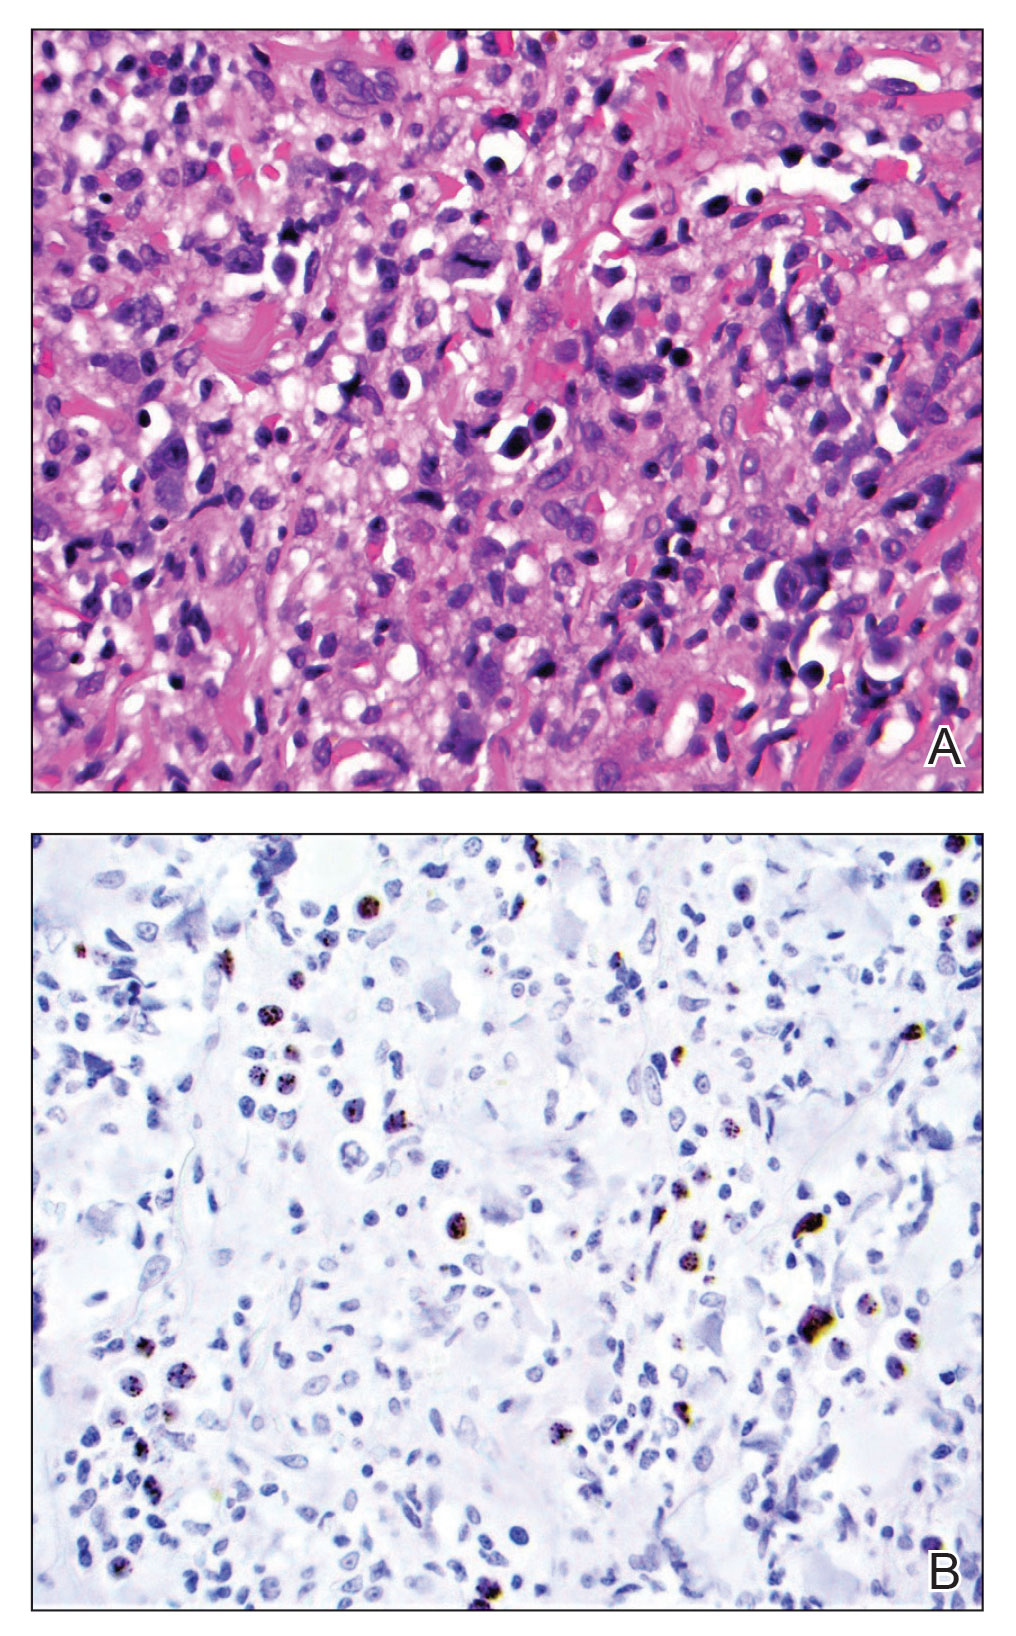 A, A punch biopsy demonstrated lymphoid aggregates and scattered large cells with plasmablastic morphology (H&E, original magnification ×400). B, Stippled staining of scattered large cells also was noted (HHV-8, original magnification ×400).